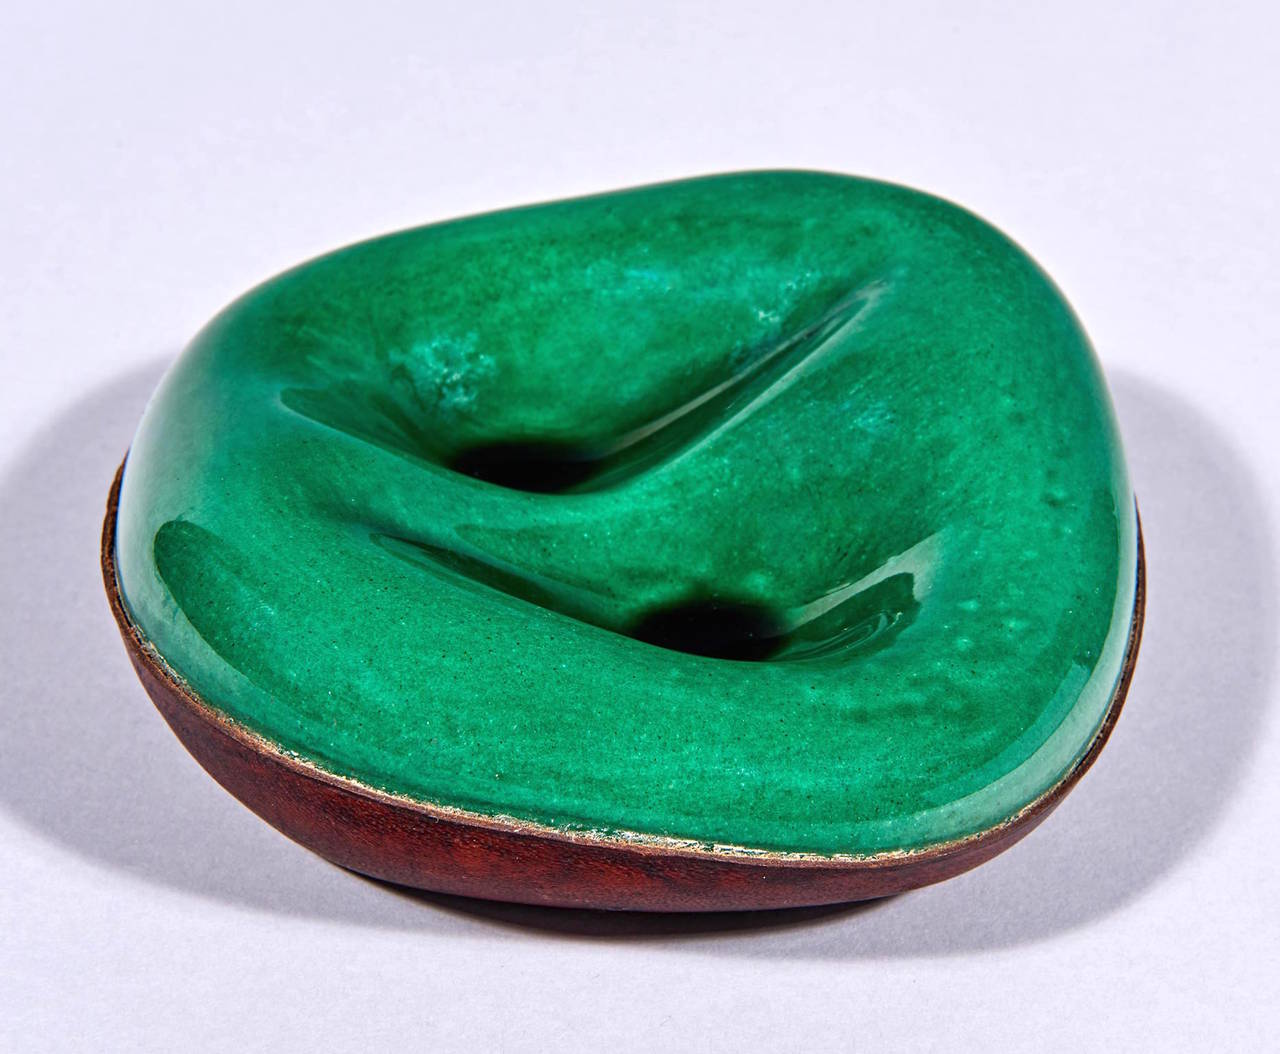 The ceramic part of this biomorphic pipe holder was made by Georges Jouve for Longchamp, who then wrapped the lower portion of the piece in leather. A lovely sculptural object even if you don't smoke a pipe. The leather is stamped 